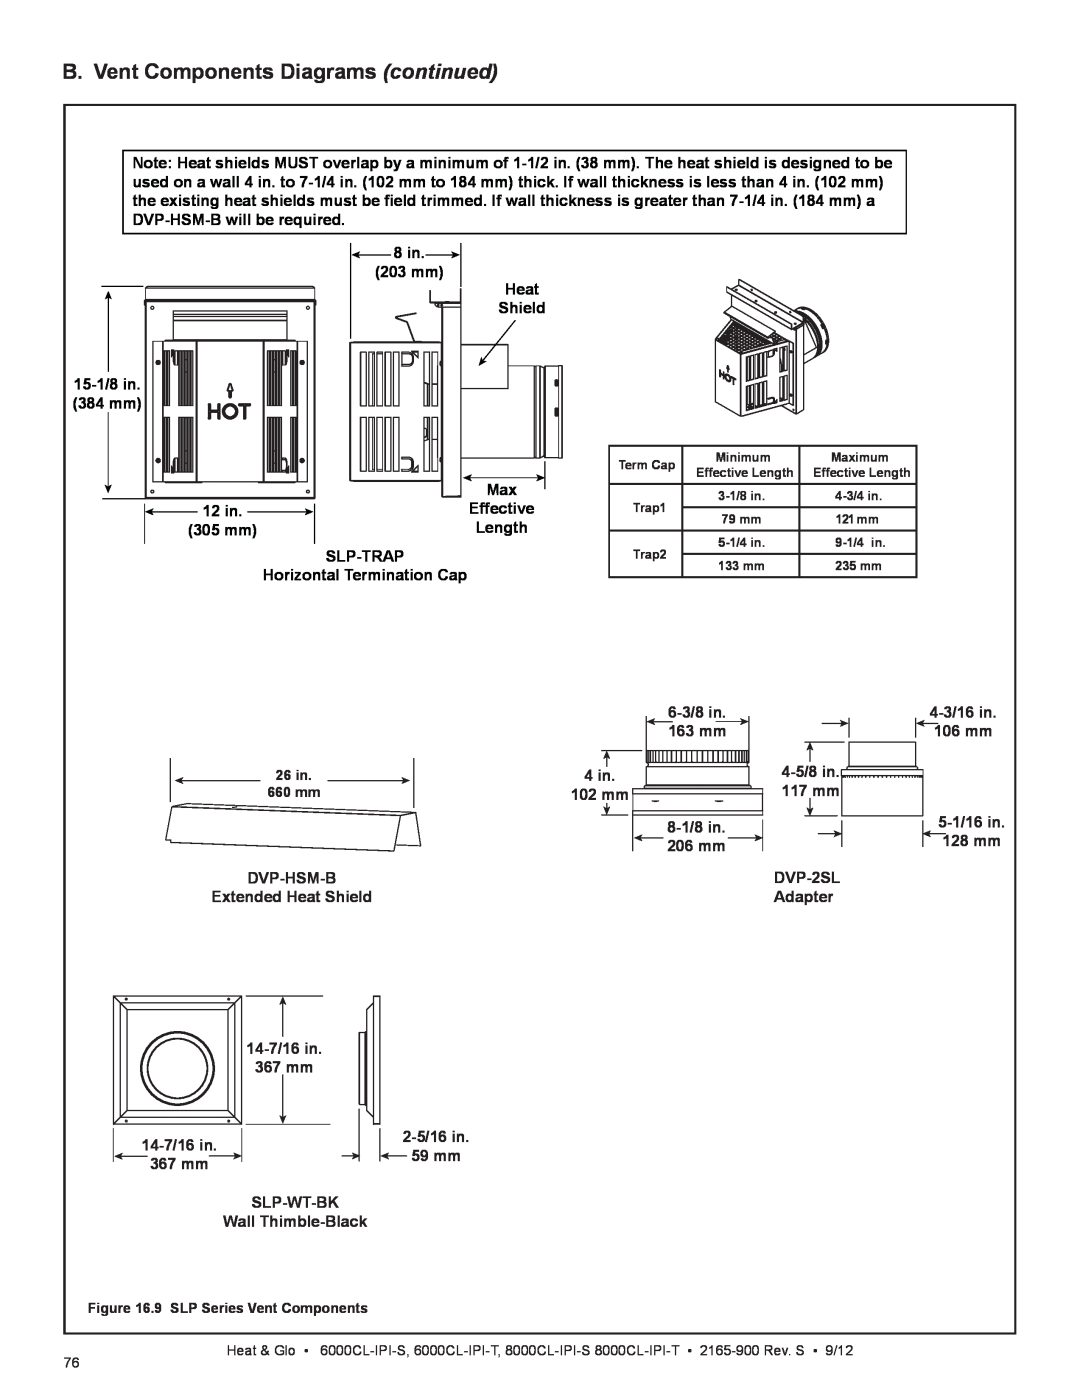 Heat & Glo LifeStyle 8000CL-IPI-S manual B. Vent Components Diagrams continued, 8 in.203 mm Heat Shield 15-1/8in 384 mm 